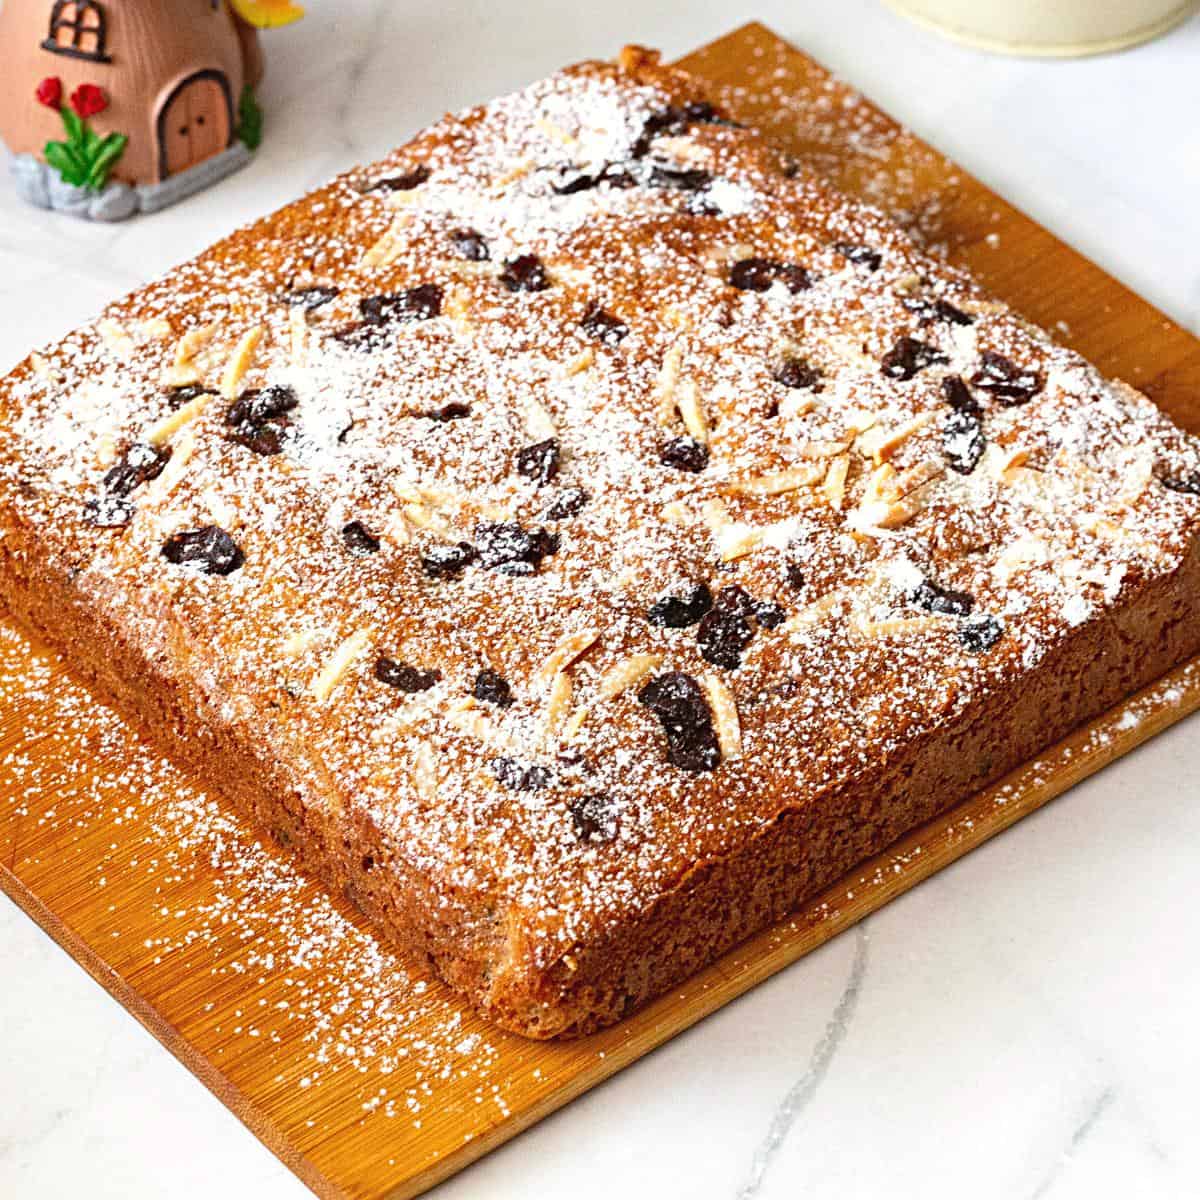 A square cake on the board.